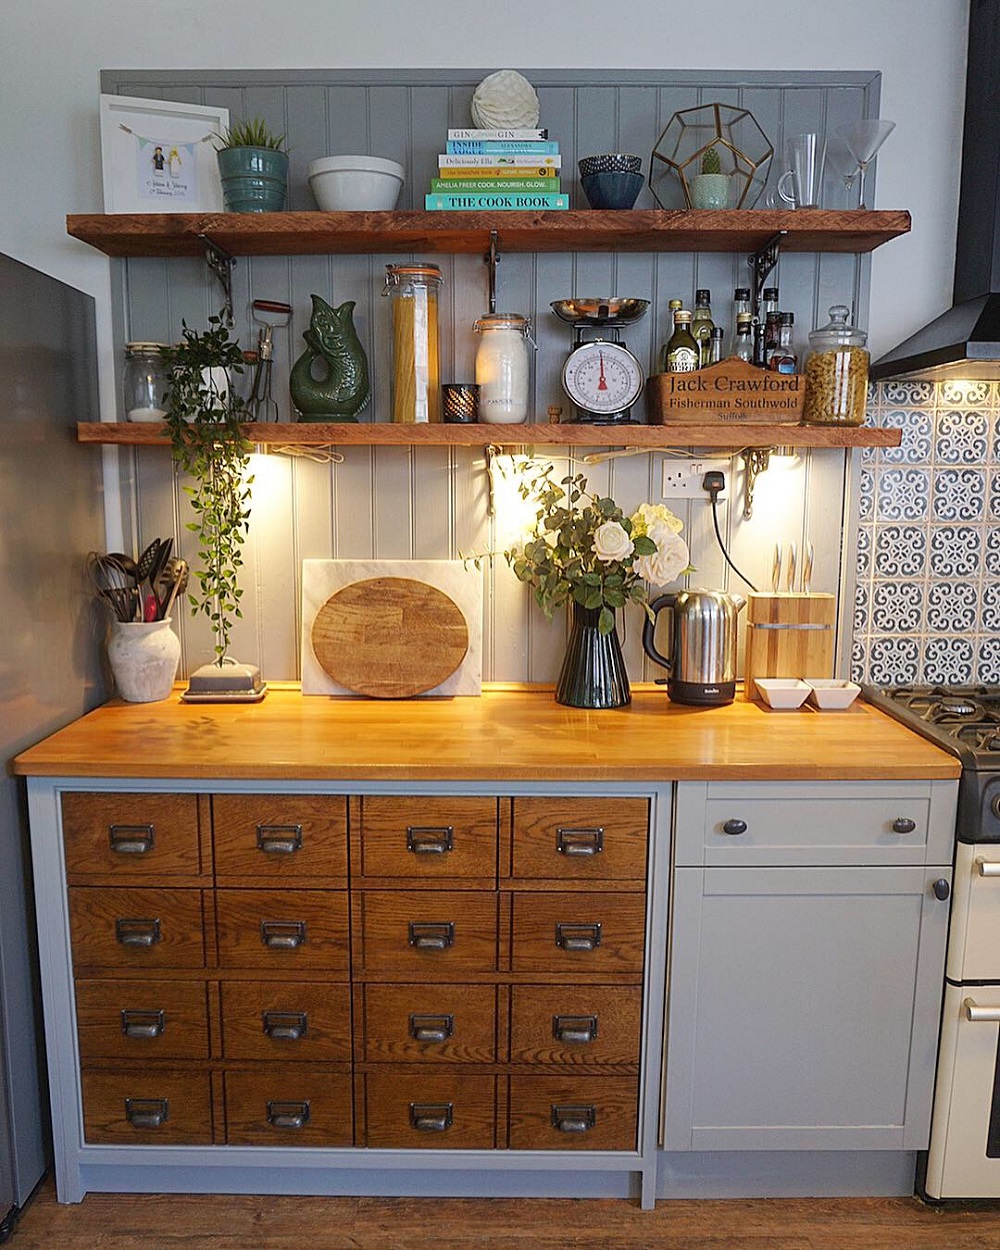 t3-63 How to use a vintage apothecary cabinet in your home décor